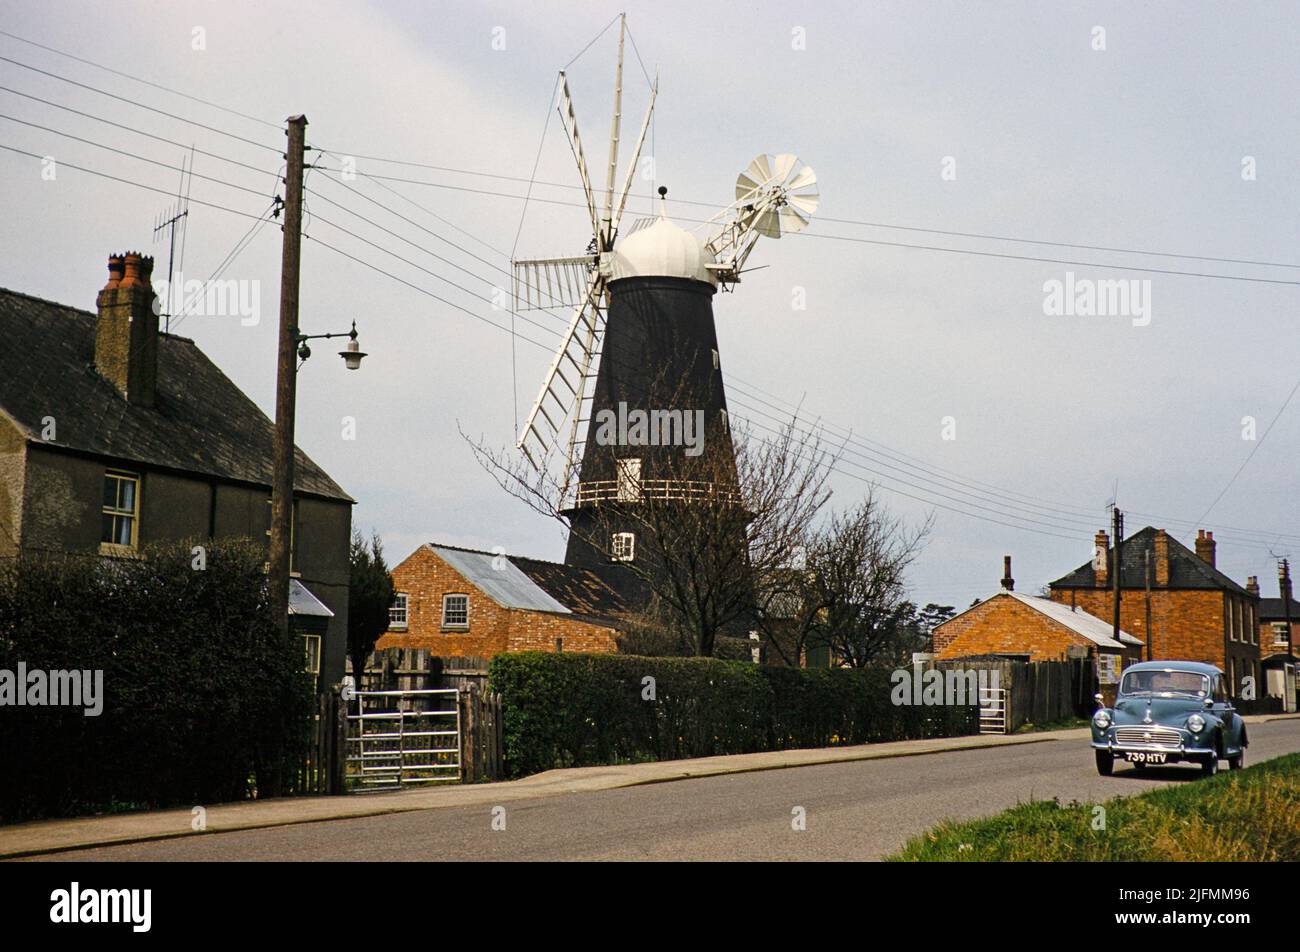 Historic windmill with Morris Minor car, Heckington, Lincolnshire, England, UK early 1960s also known as Pocklington's Mill Stock Photo